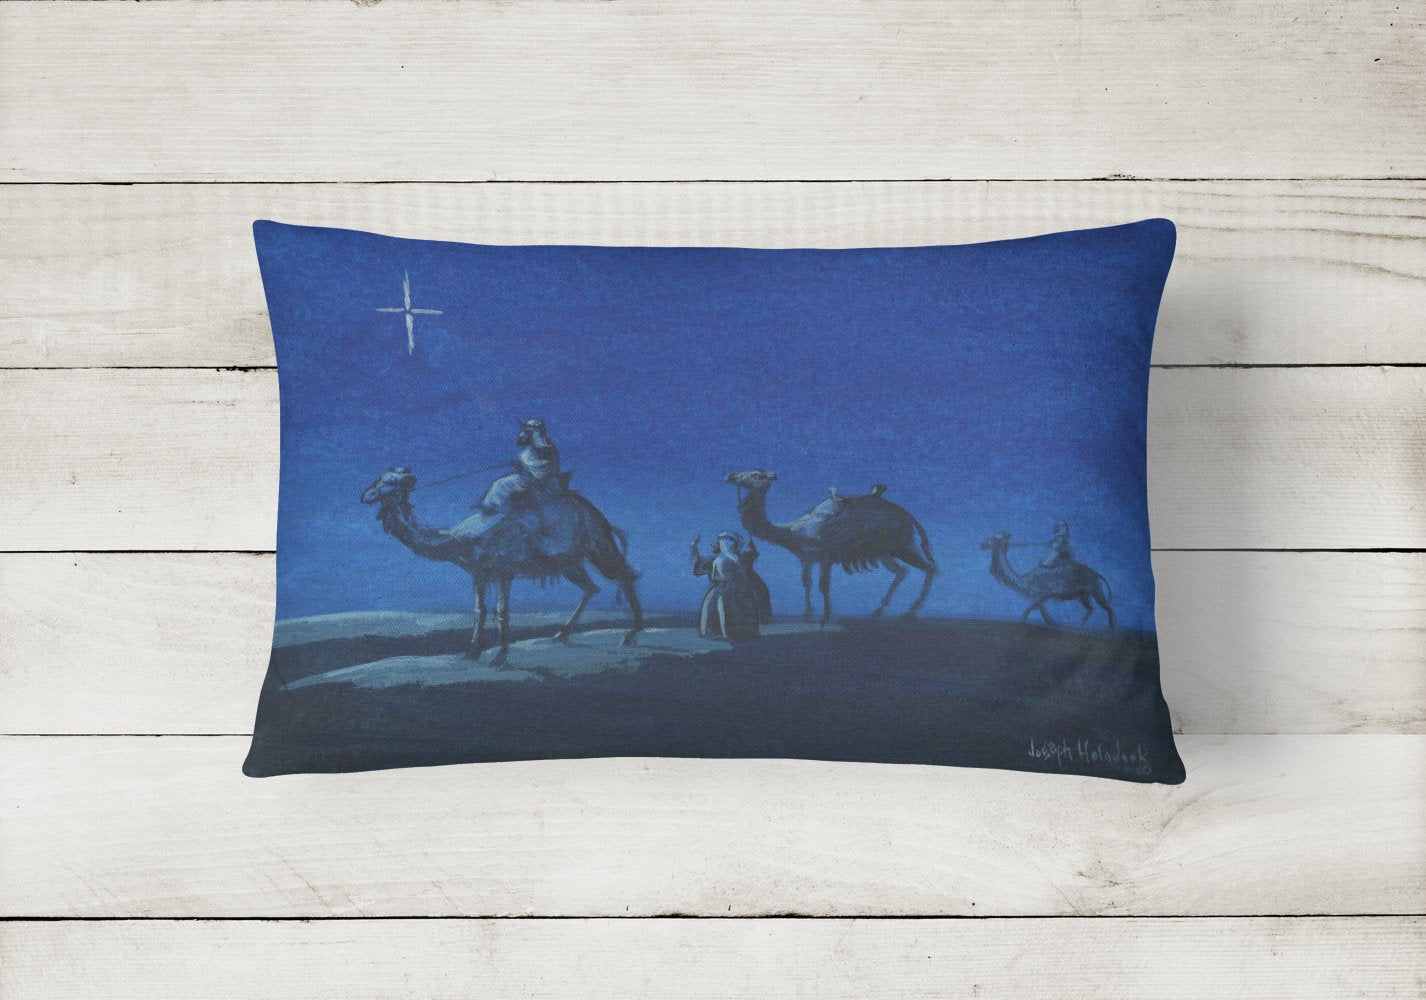 Wise Men in Blue Canvas Fabric Decorative Pillow PJH3001PW1216 by Caroline's Treasures